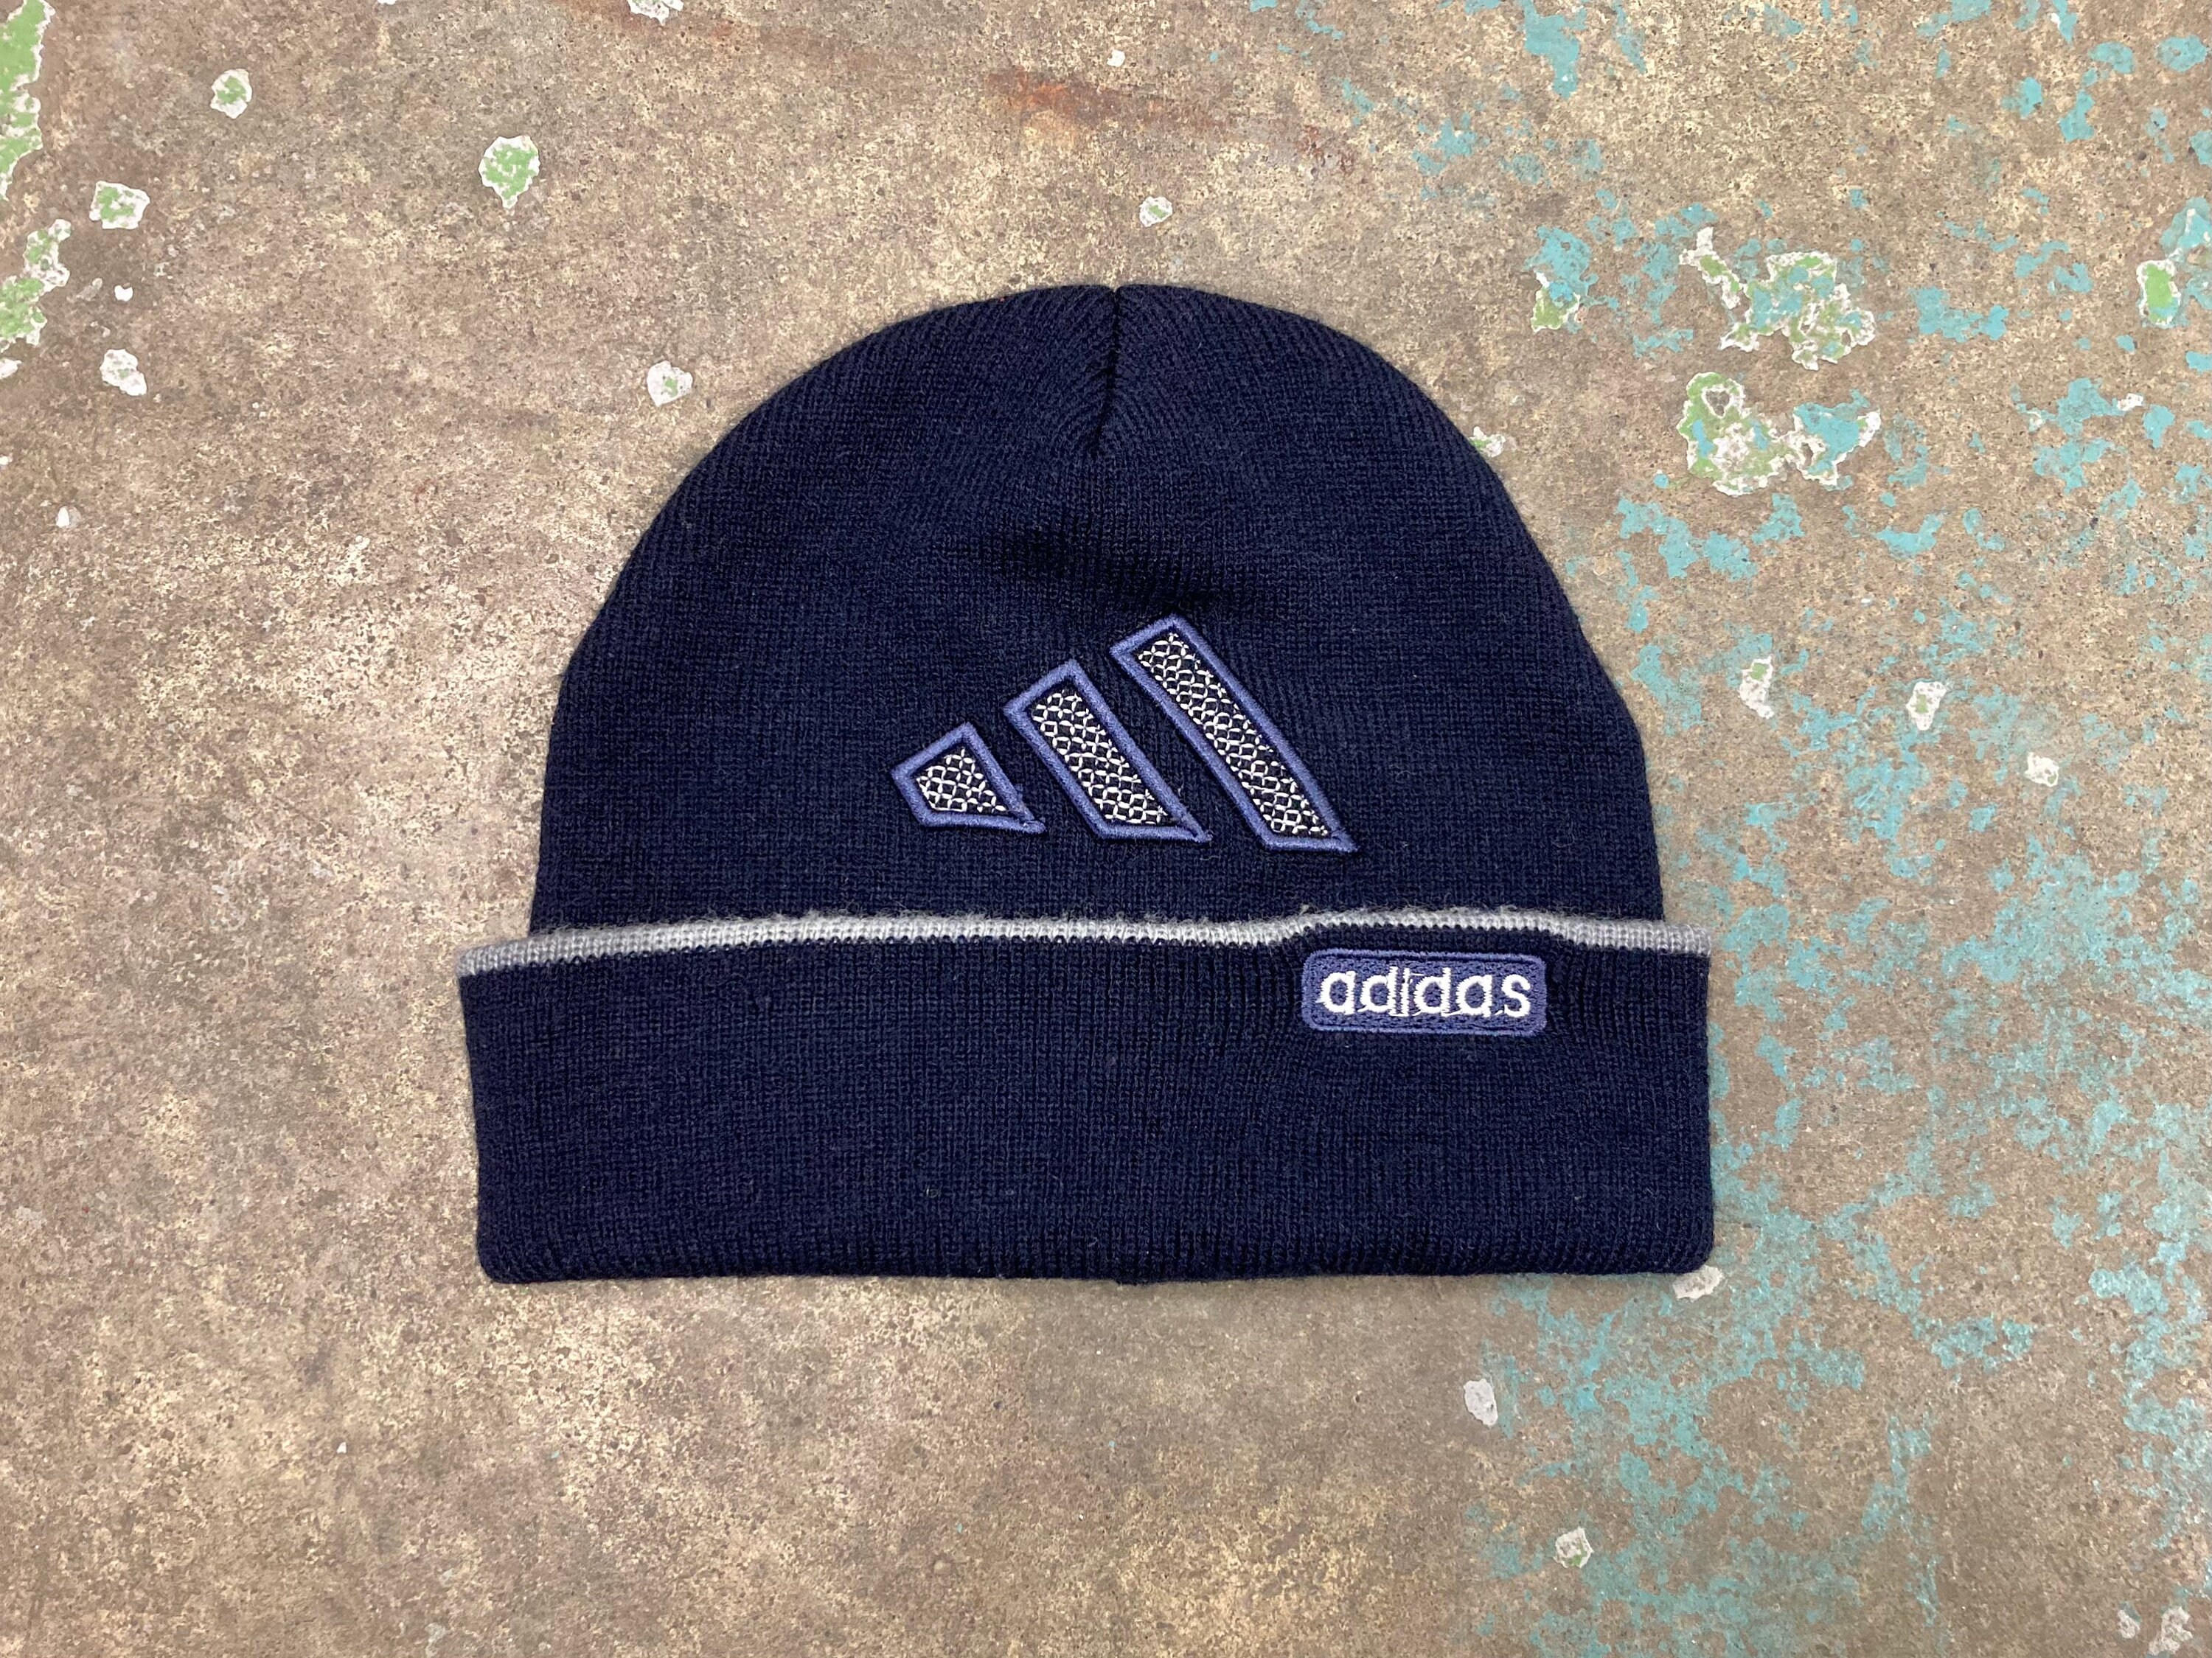 adidas Tuque à 3 rayures - Homme